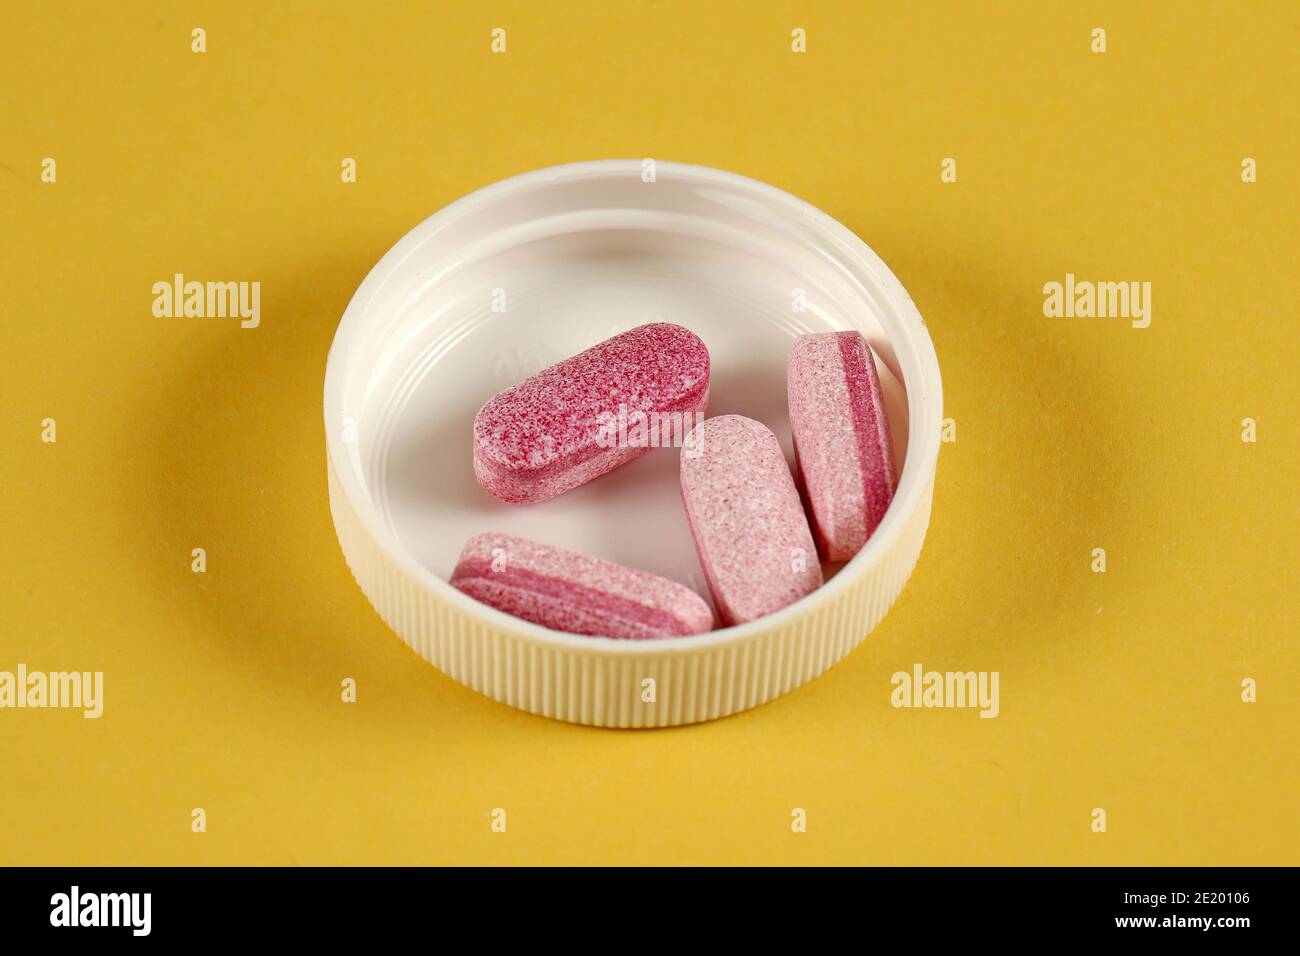 Pink health multivitamin supplement tablets inside white plastic lid Stock Photo